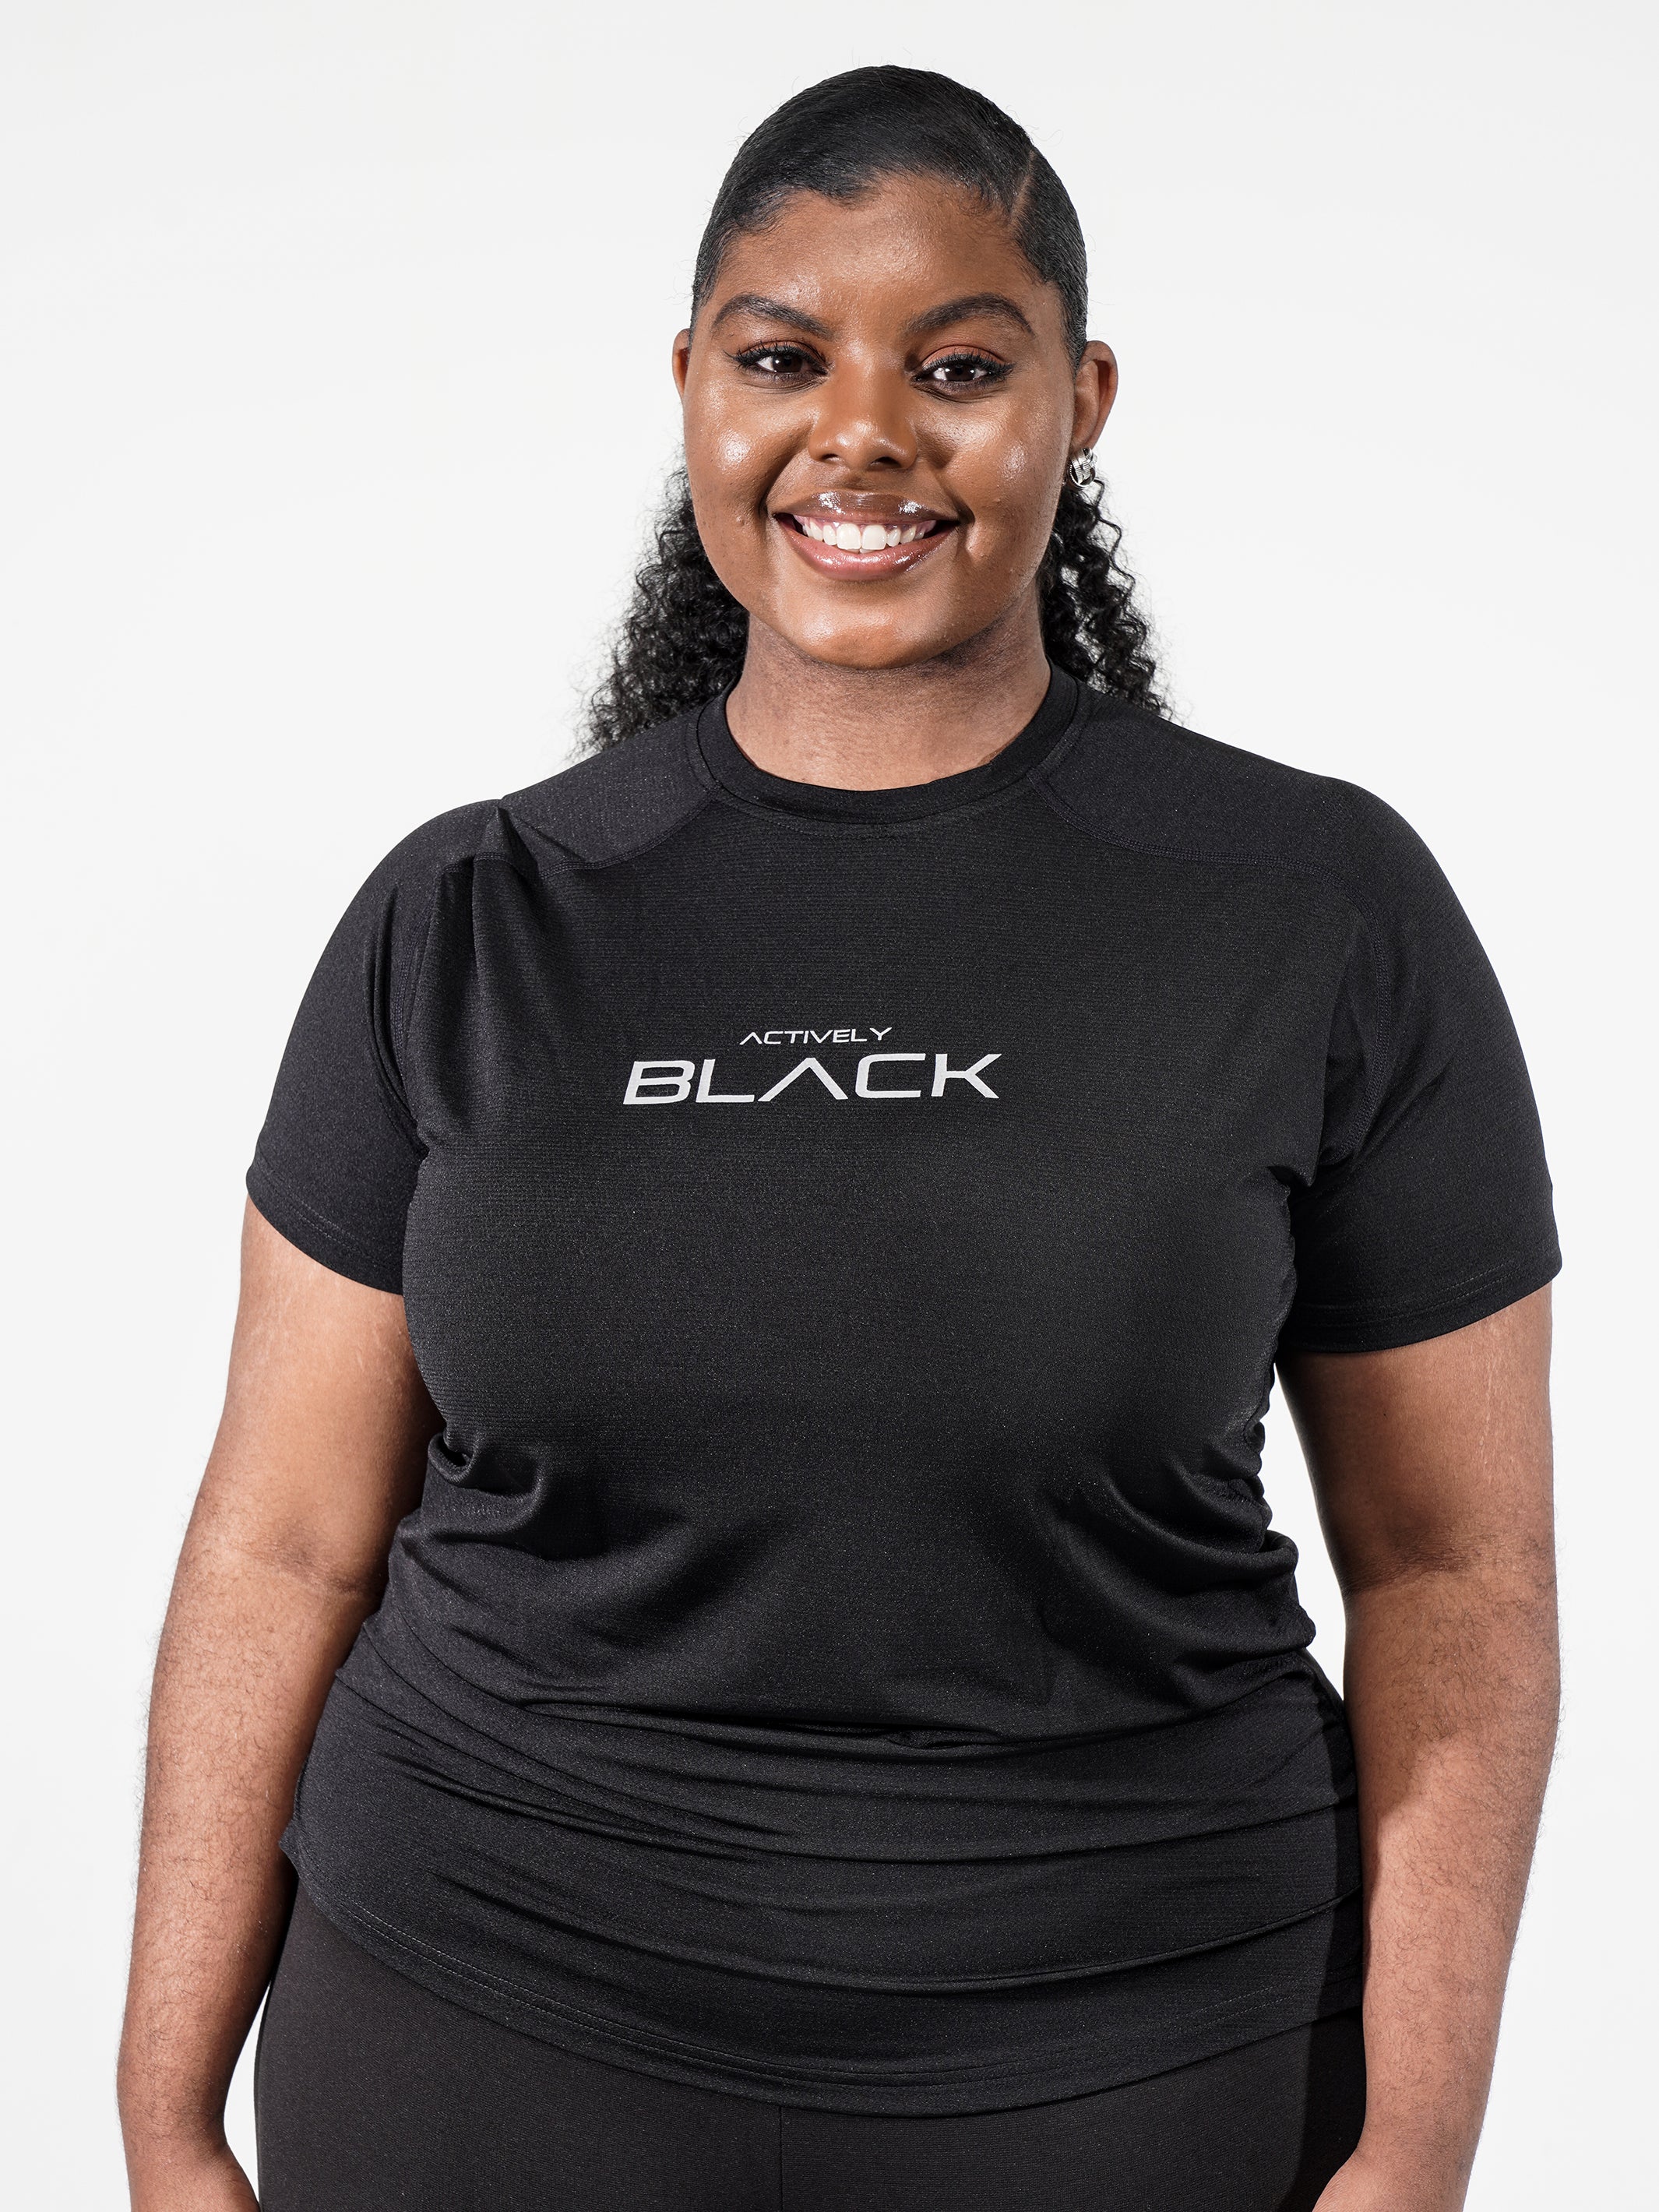 Shirts & Tops – Tagged "WOMEN"– Actively Black Athleisure